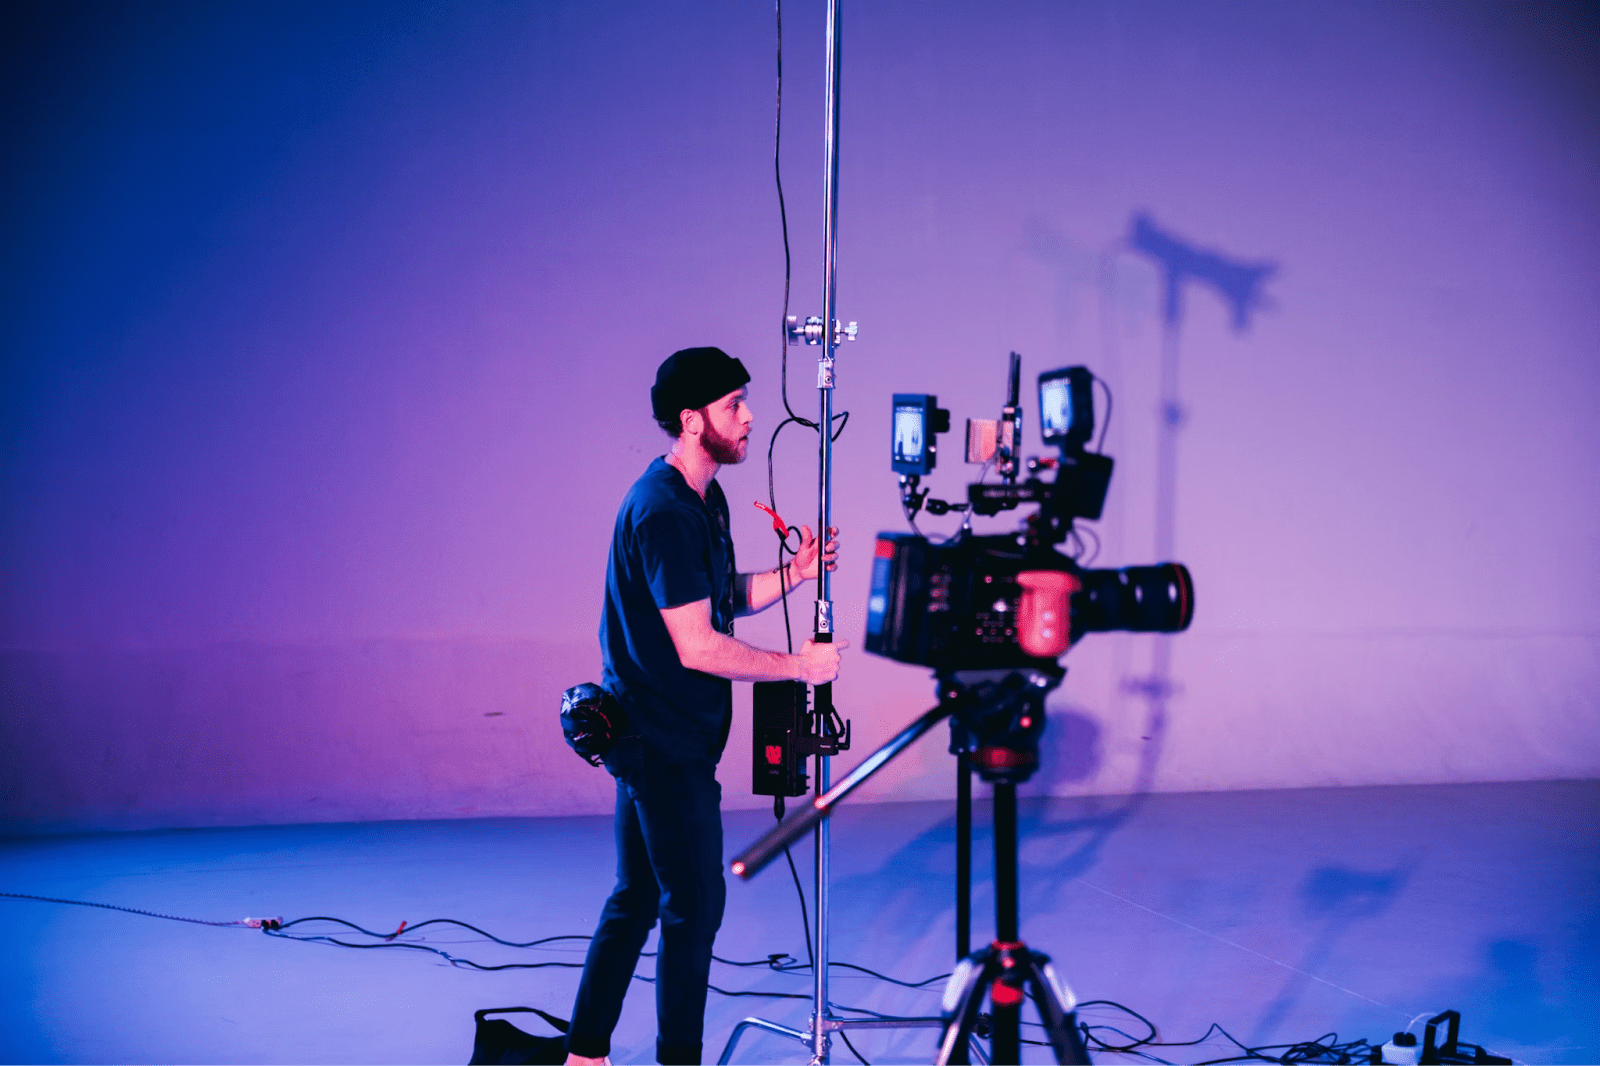 A man using recording equipment in a studio, basked in purple light.